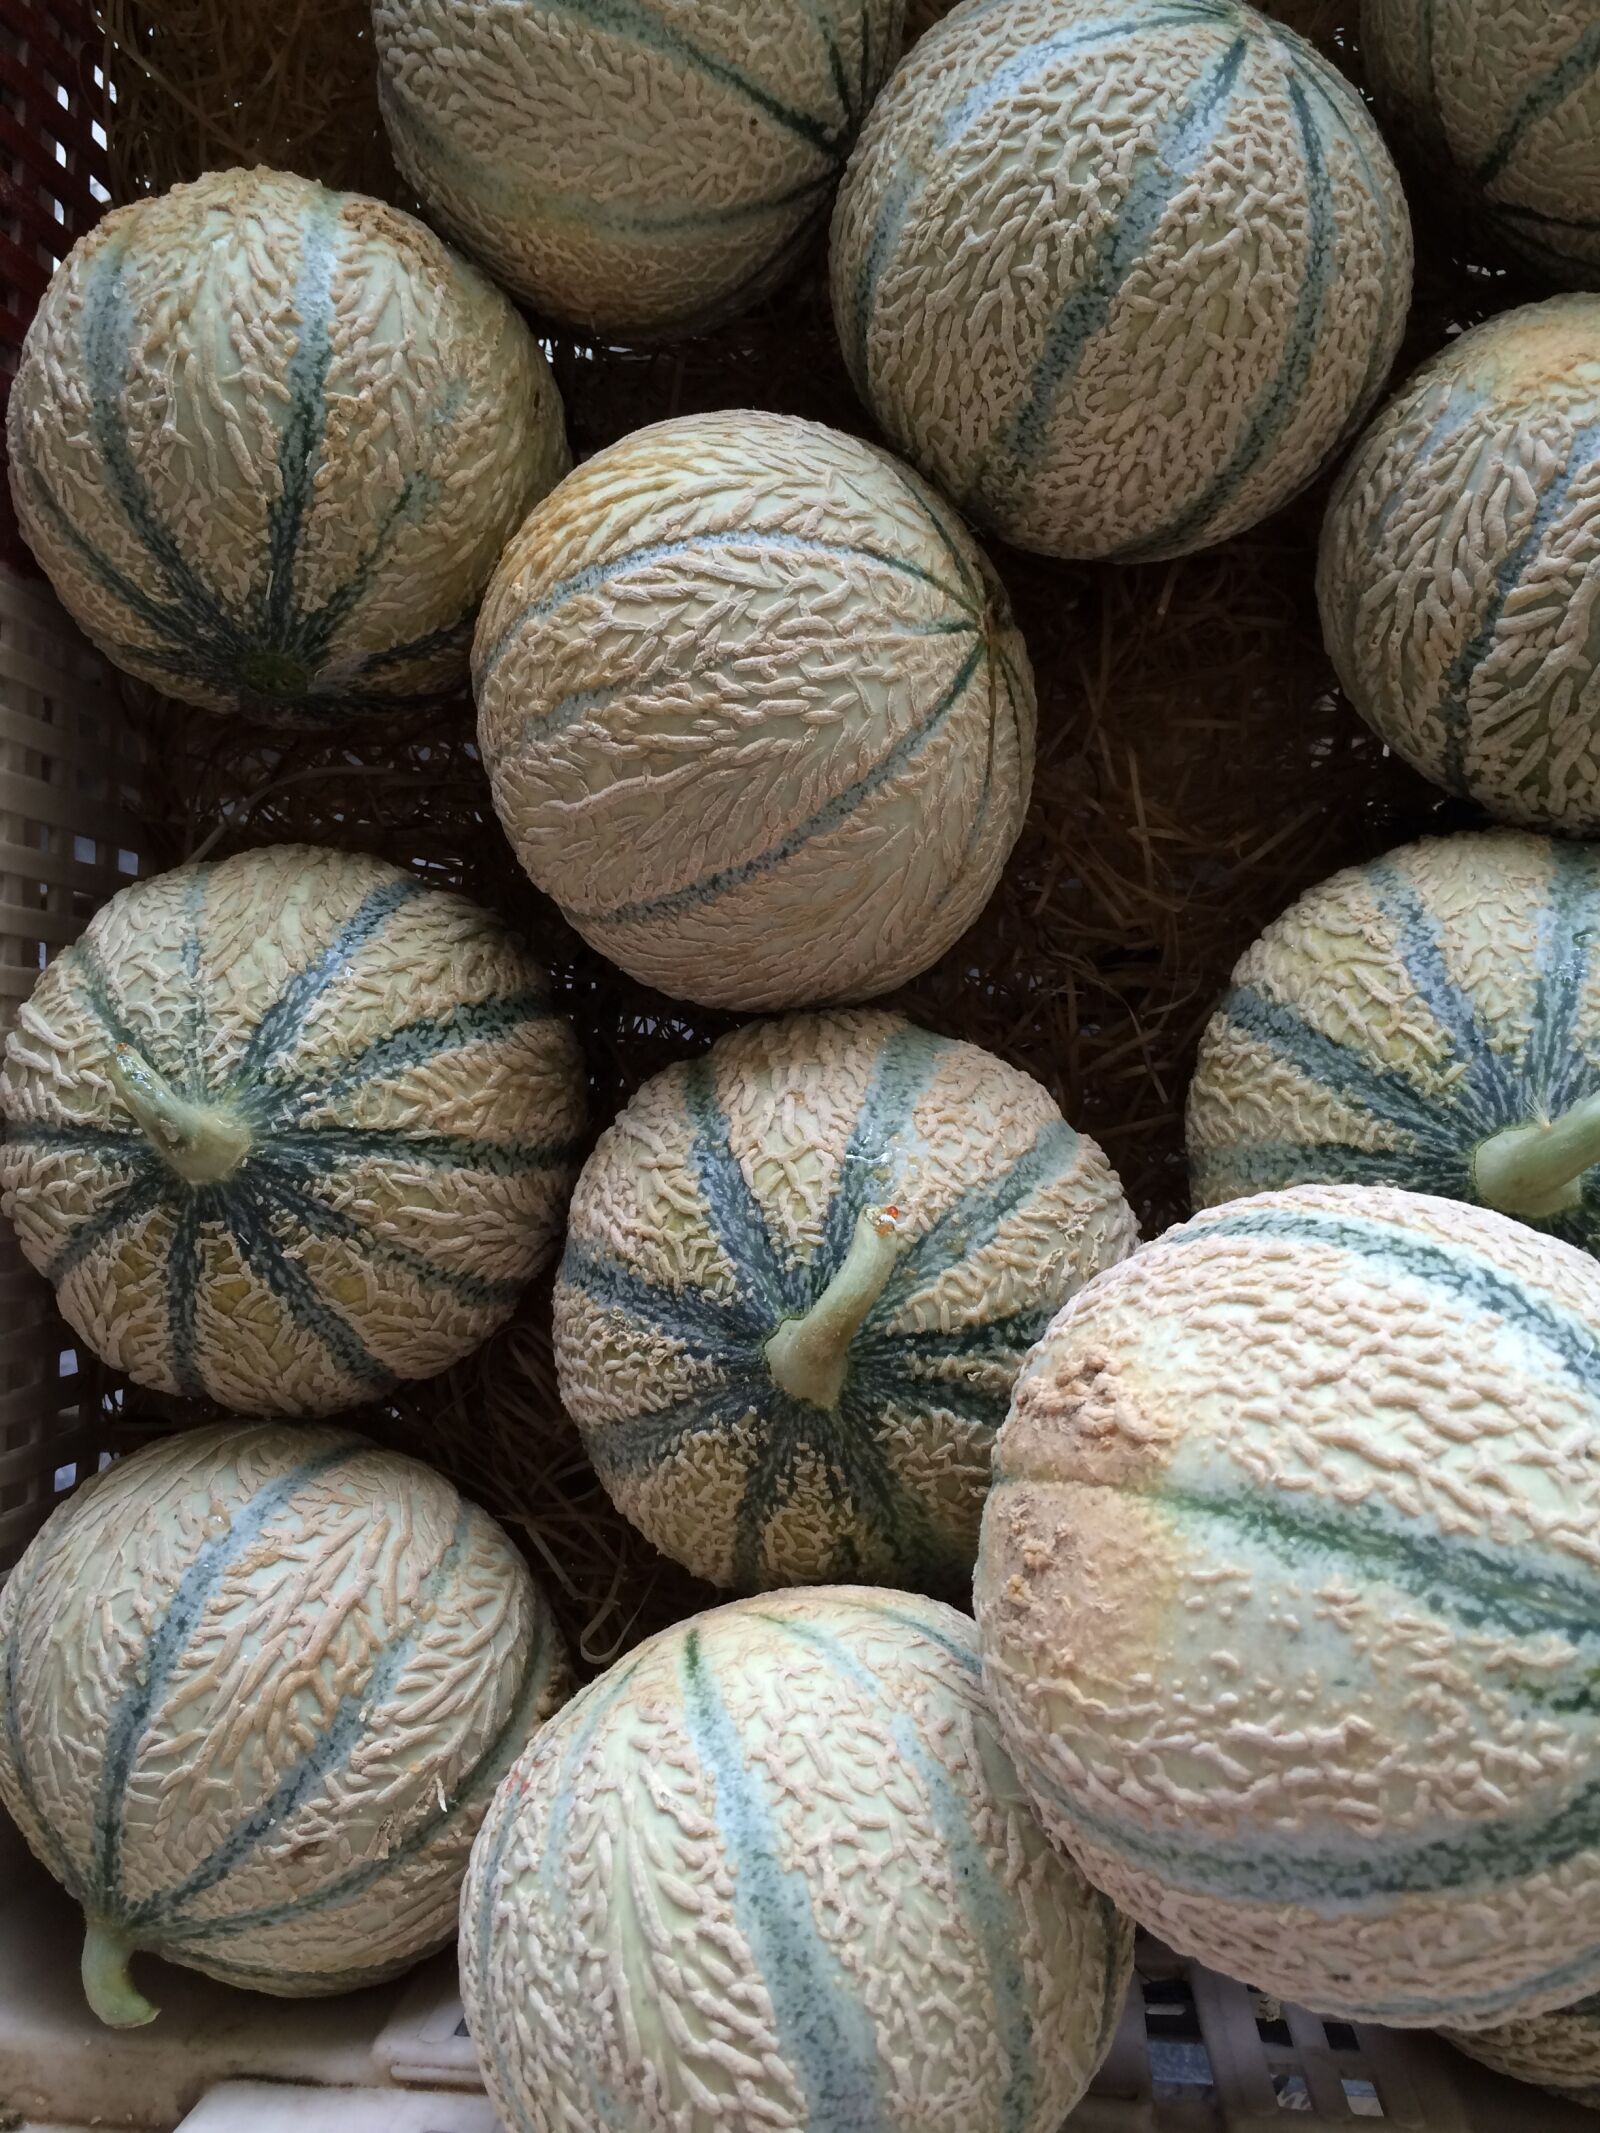 Apple iPhone 5s sample photo. Cantaloupe, melons, fruit photography